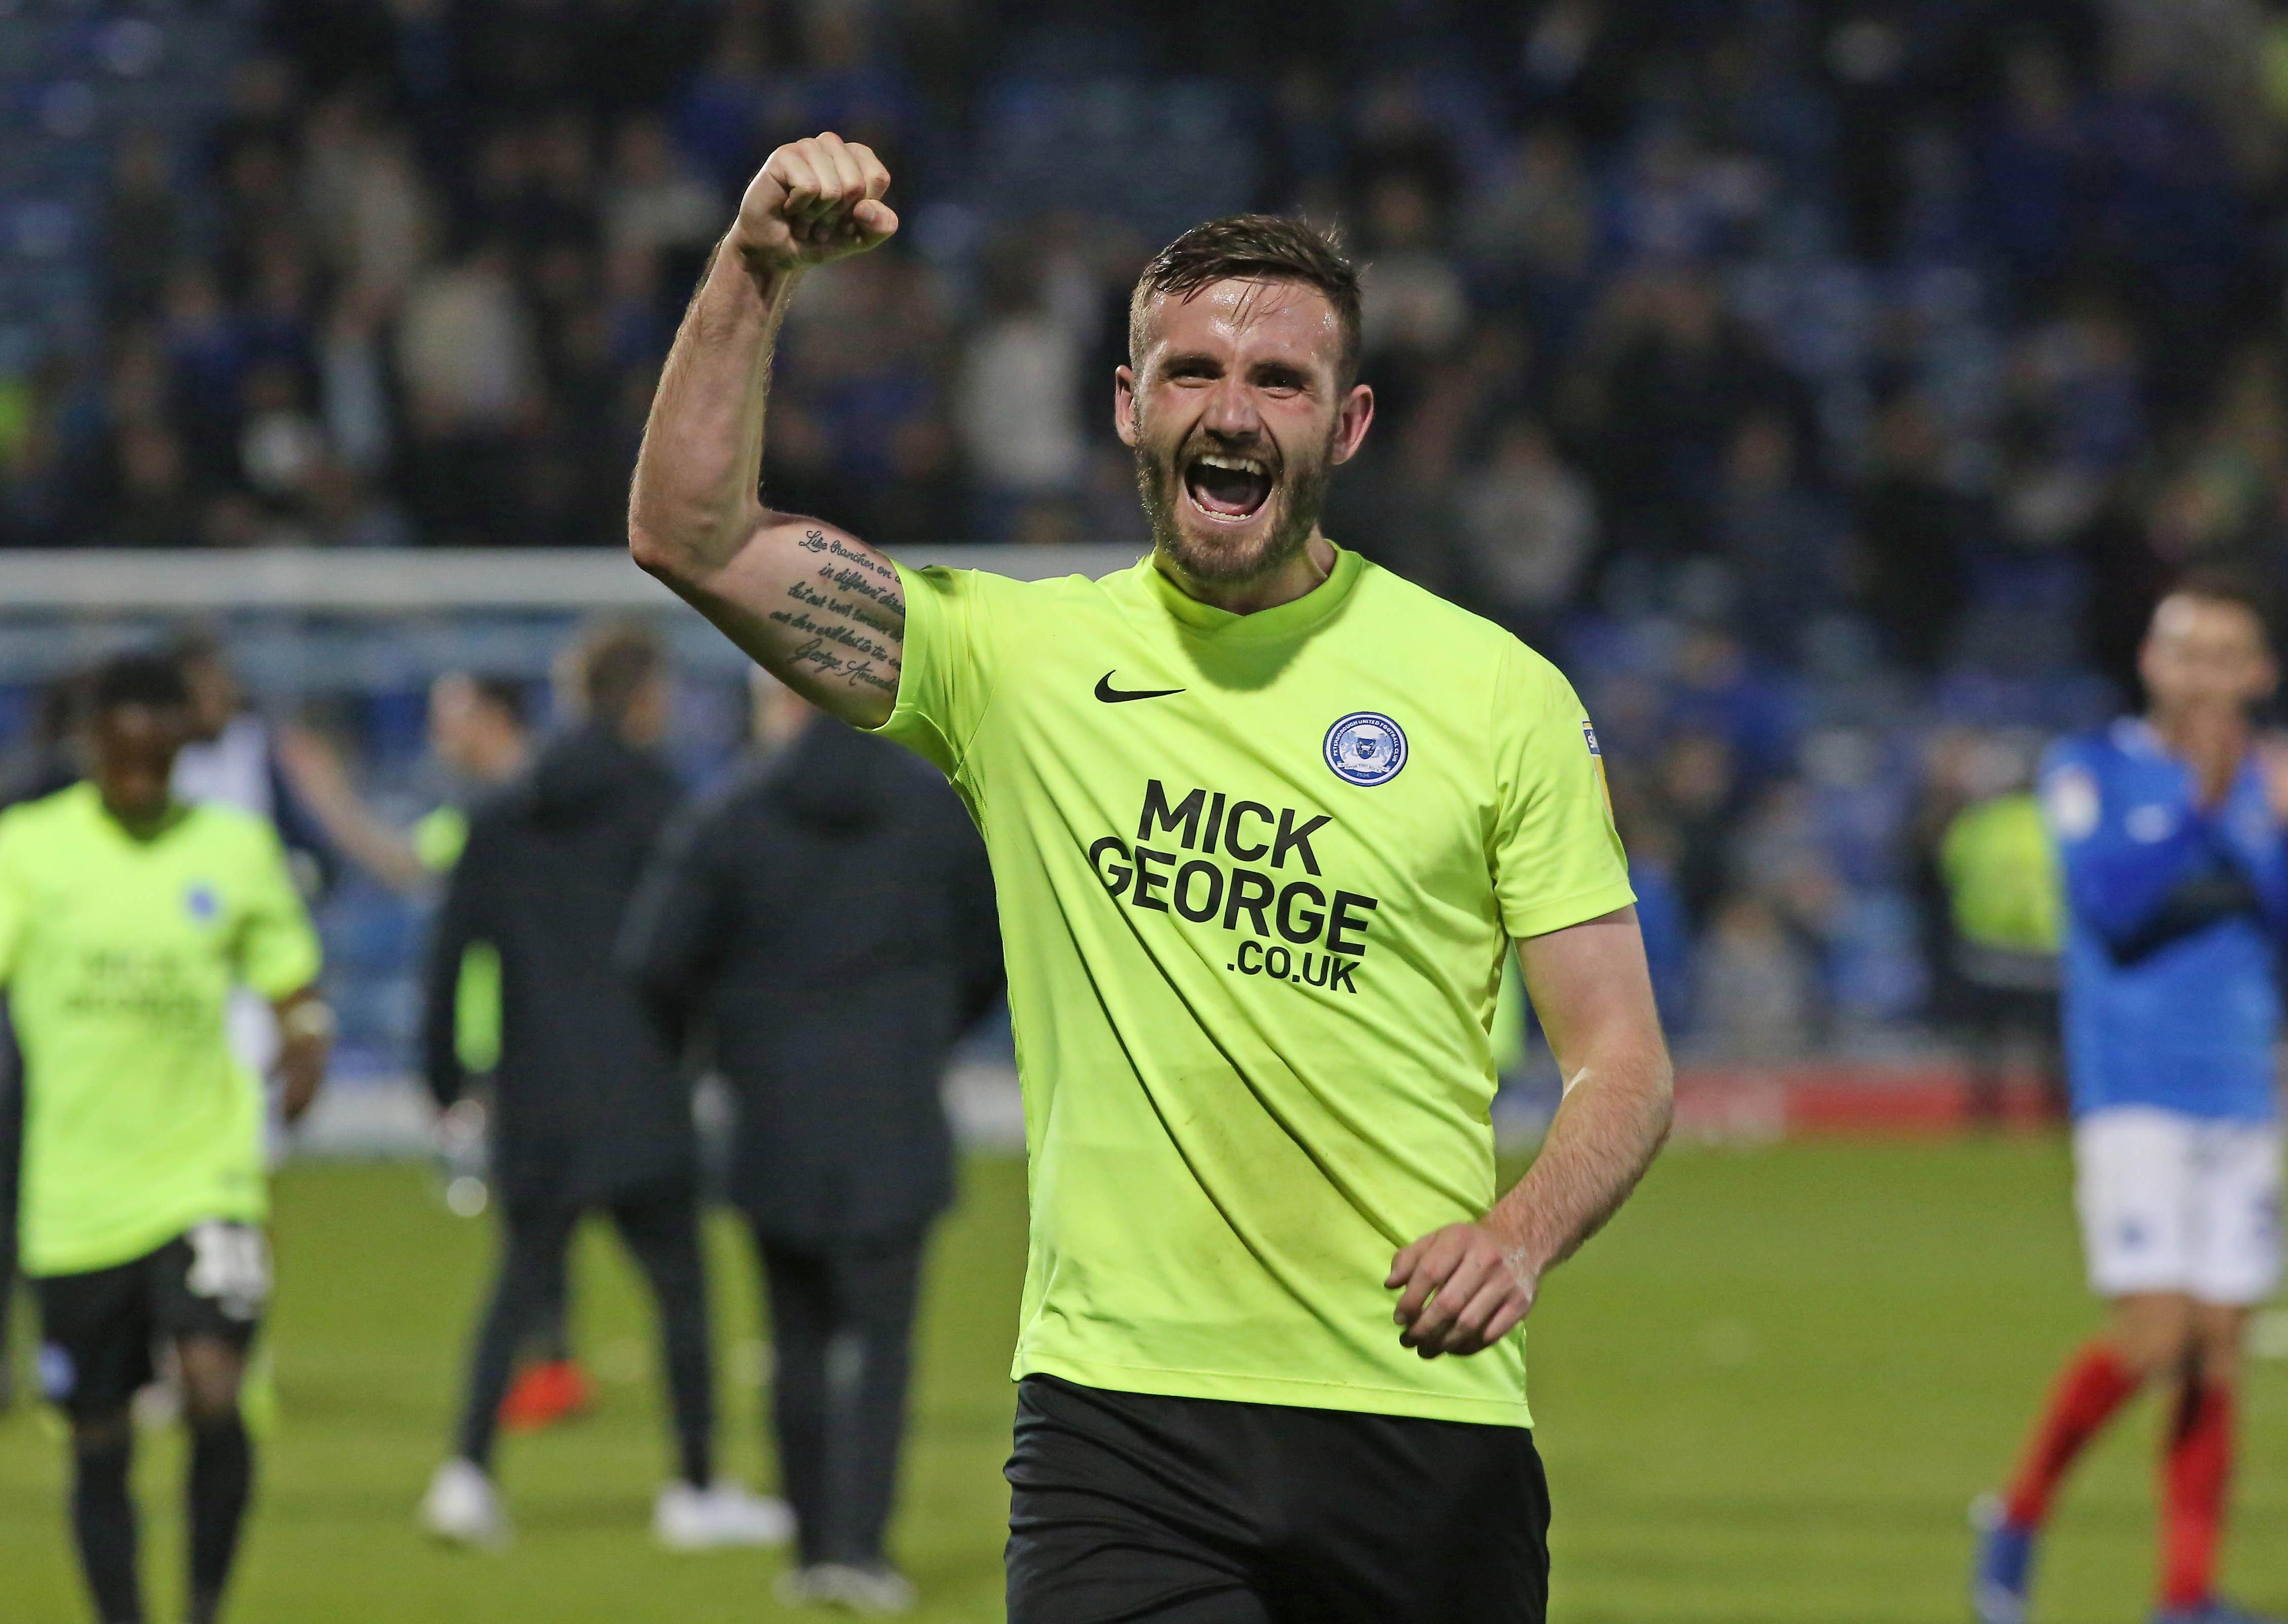 Posh full-back Jason Naismith celebrates a 3-2 success at Portsmouth in a must-win match for both sides late in April. It was a superb contest, the best Posh game of 2019.